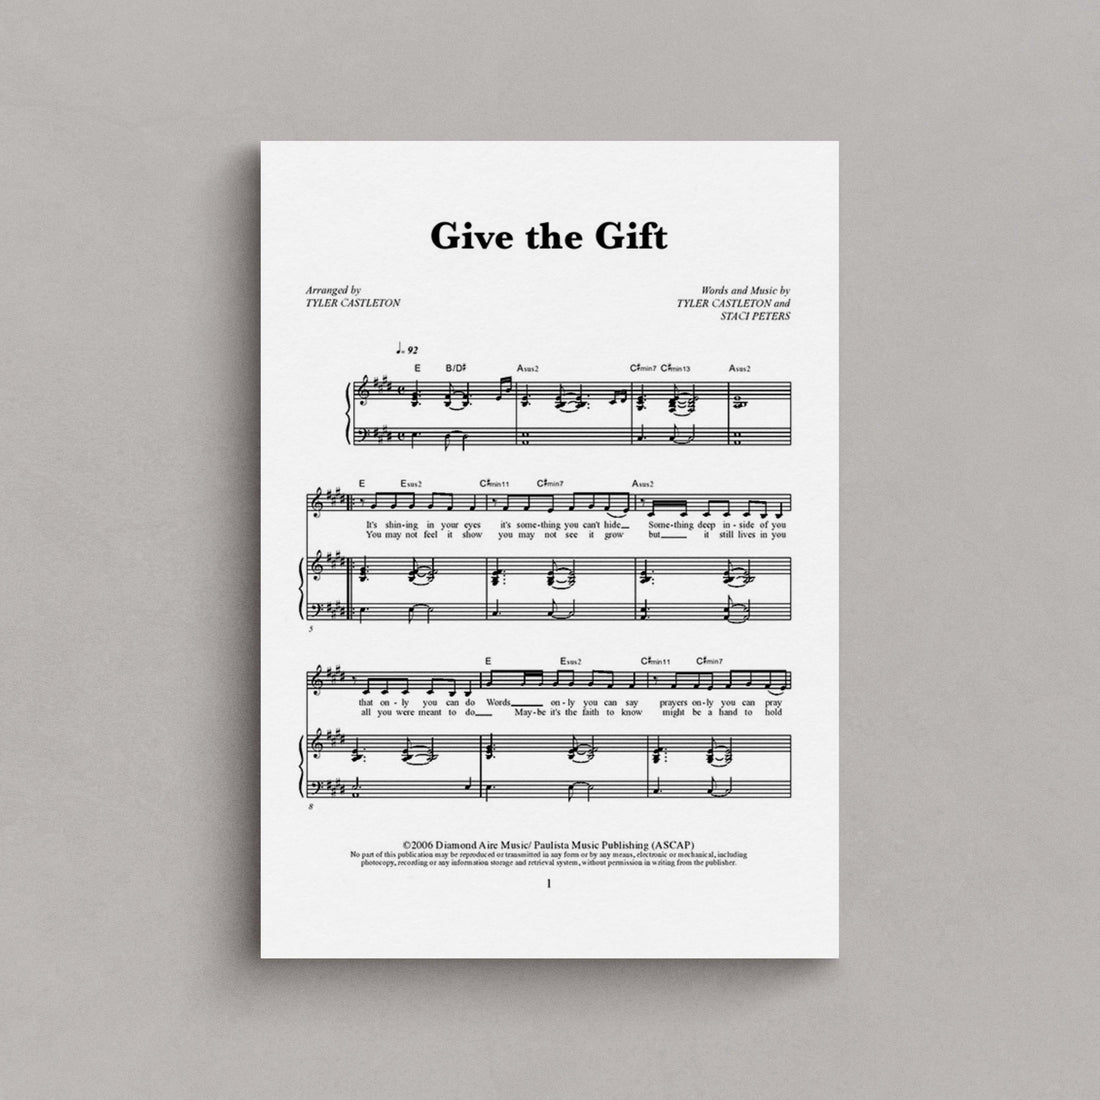 Give the Gift